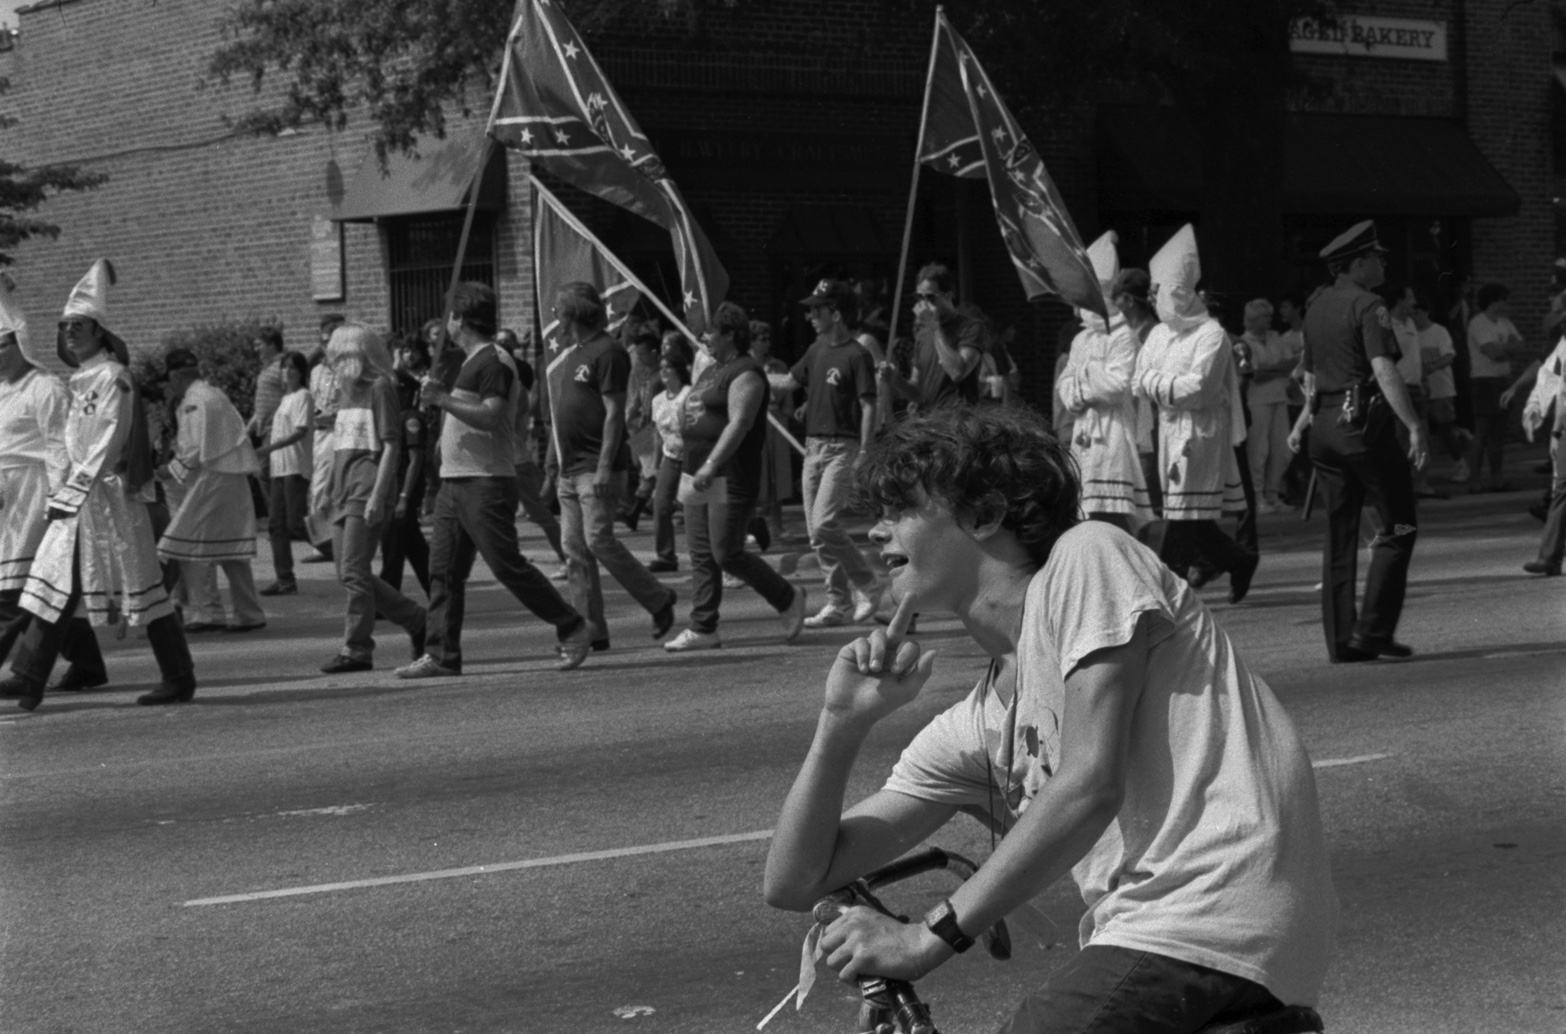 Michael Galinsky, The Day the KKK Came to Town, 1987 (produced 2015)